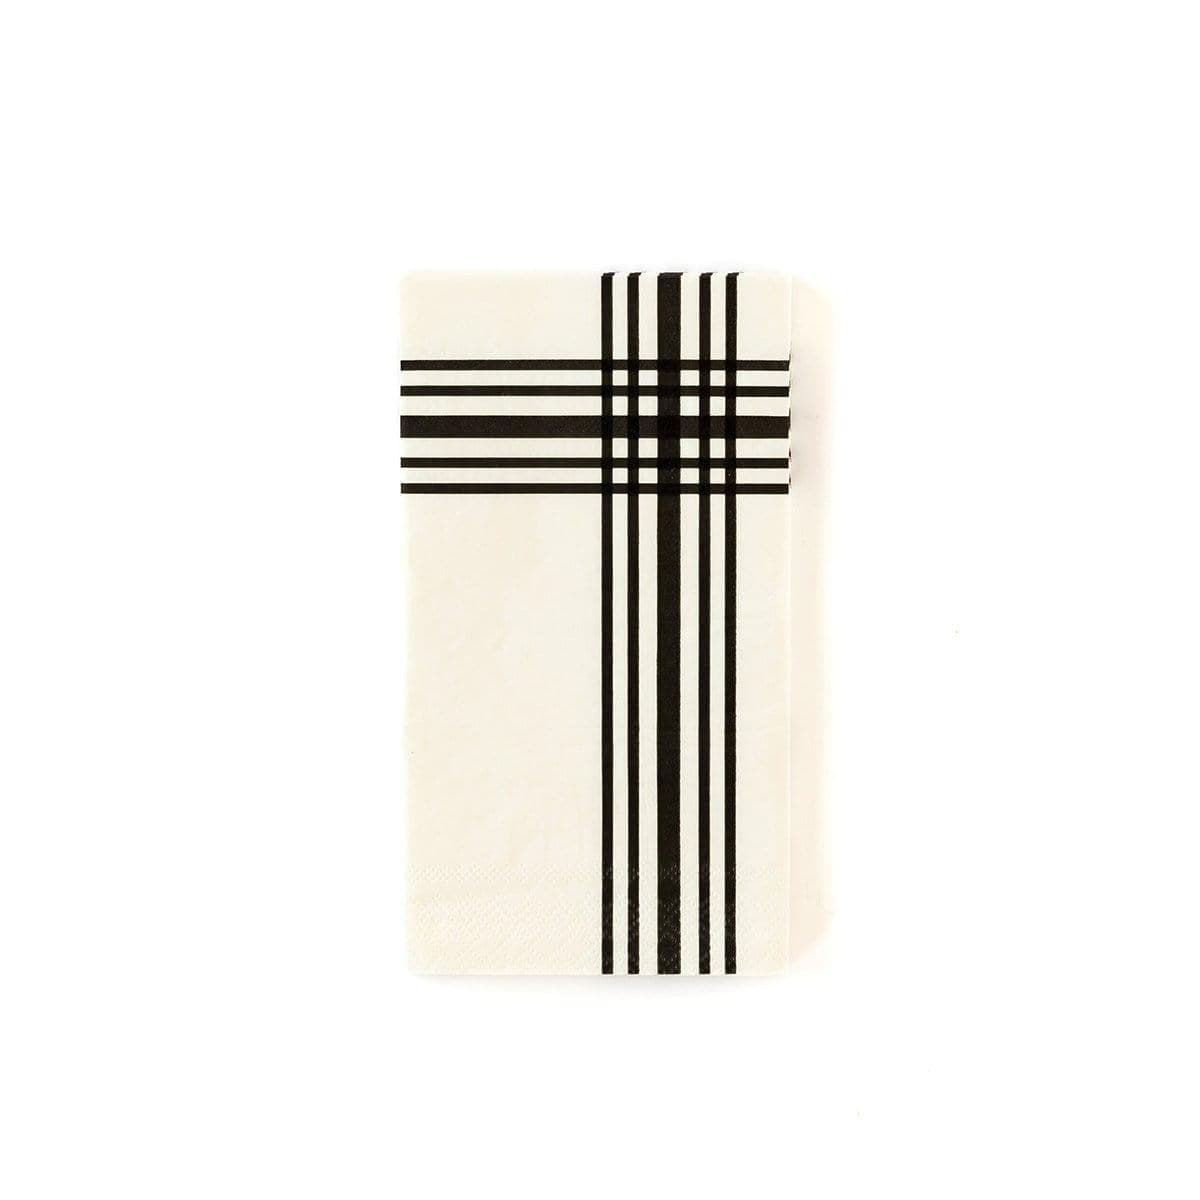 Buy Everyday Entertaining Gingham Farm Lunch Napkins, 24 Count sold at Party Expert